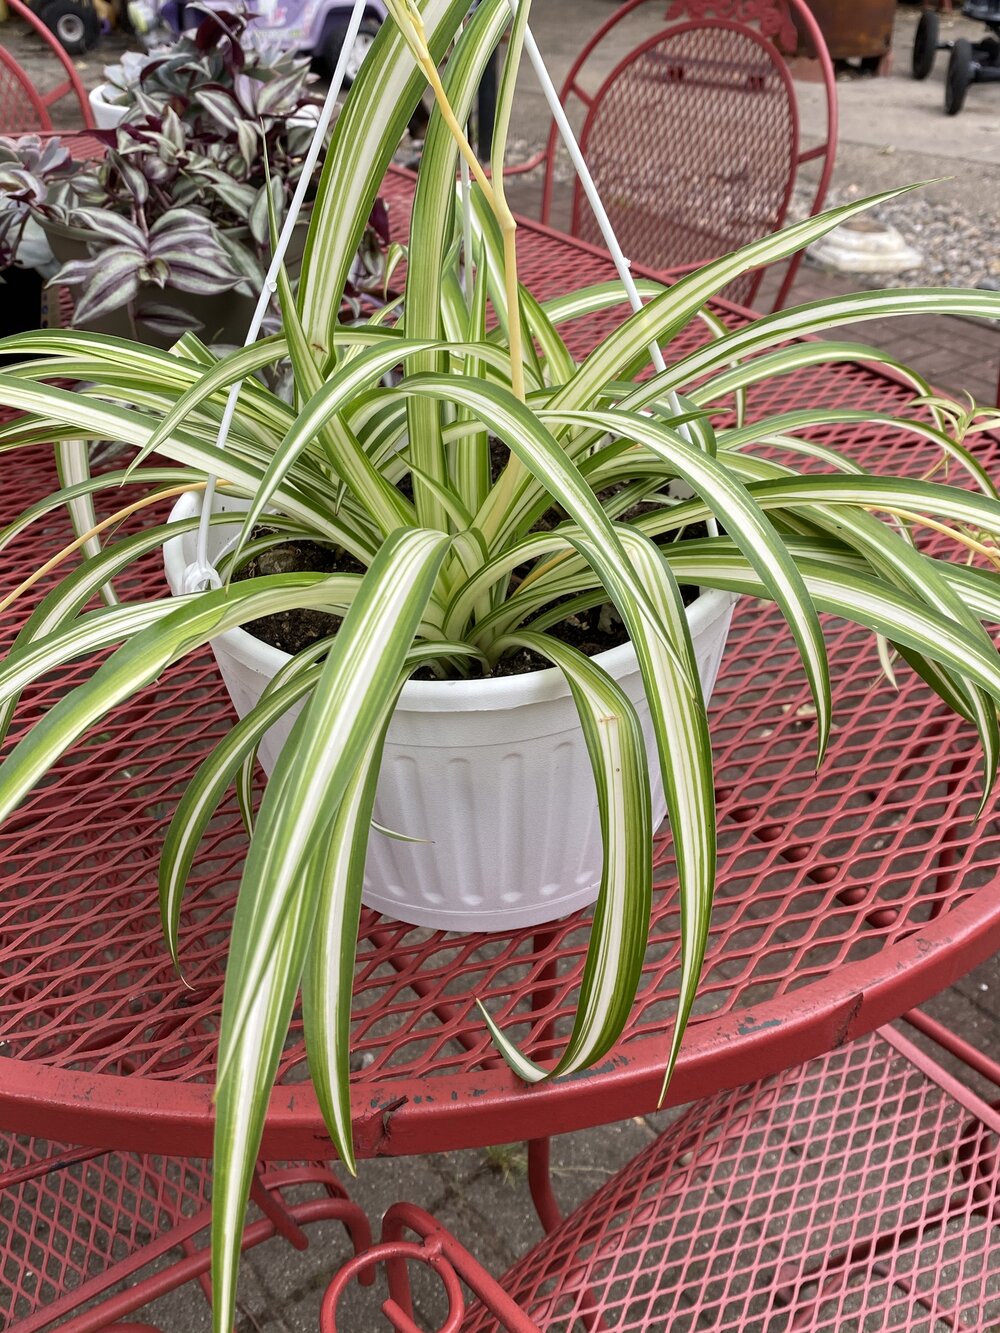 Spider Plants in Aquariums – How To Ensure That They Thrive